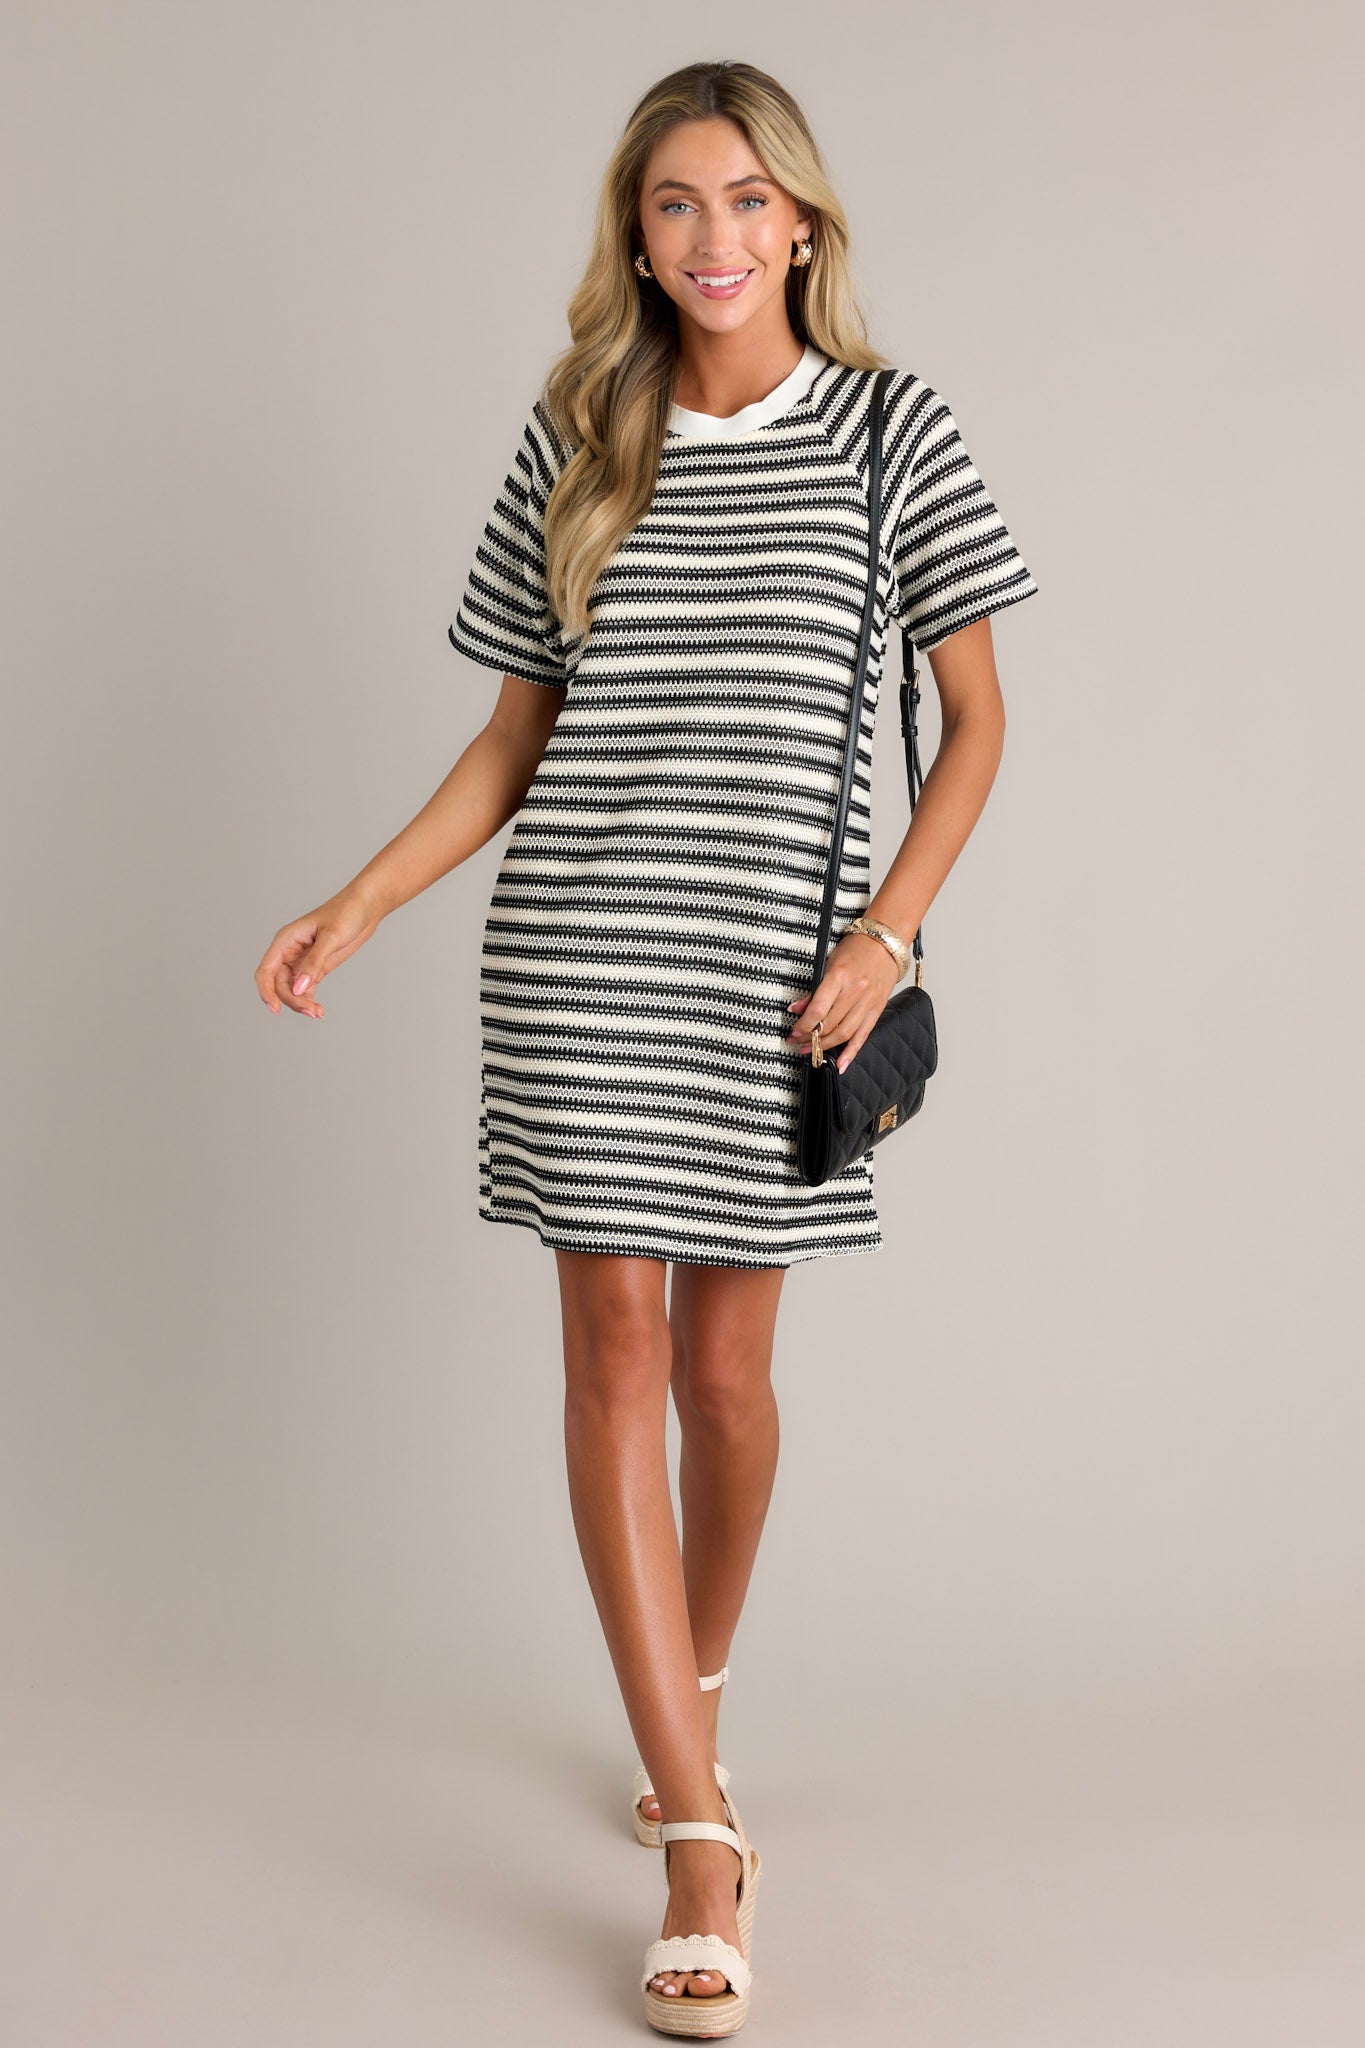 This black stripe mini dress features a crew neckline, a knitted horizontal stripe design, a relaxed fit, and short sleeves.